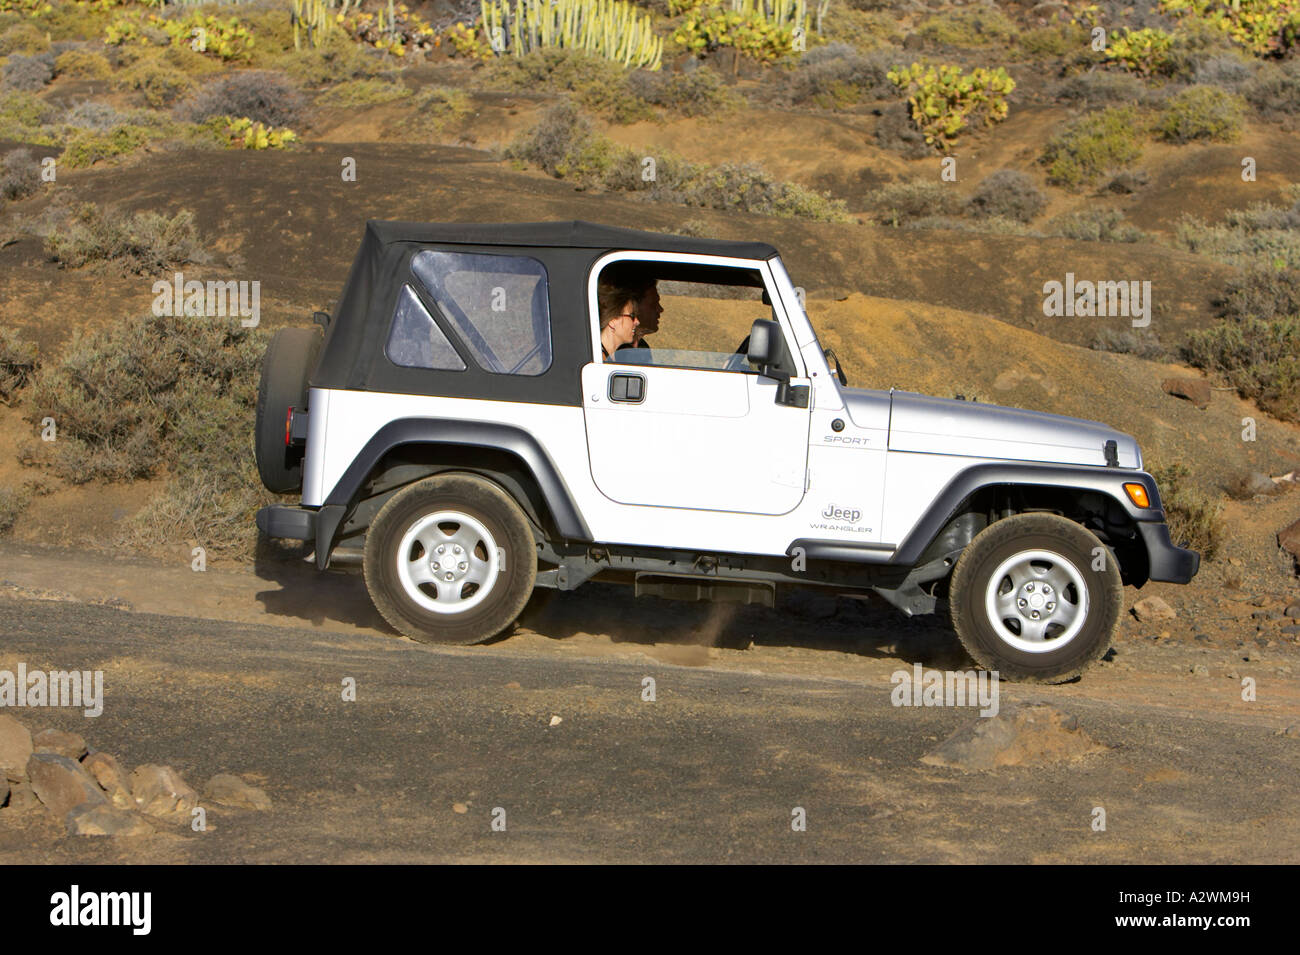 Soft top Wrangler Jeep sport 4x4 driving off road on dirt track through  cactus fields Stock Photo - Alamy